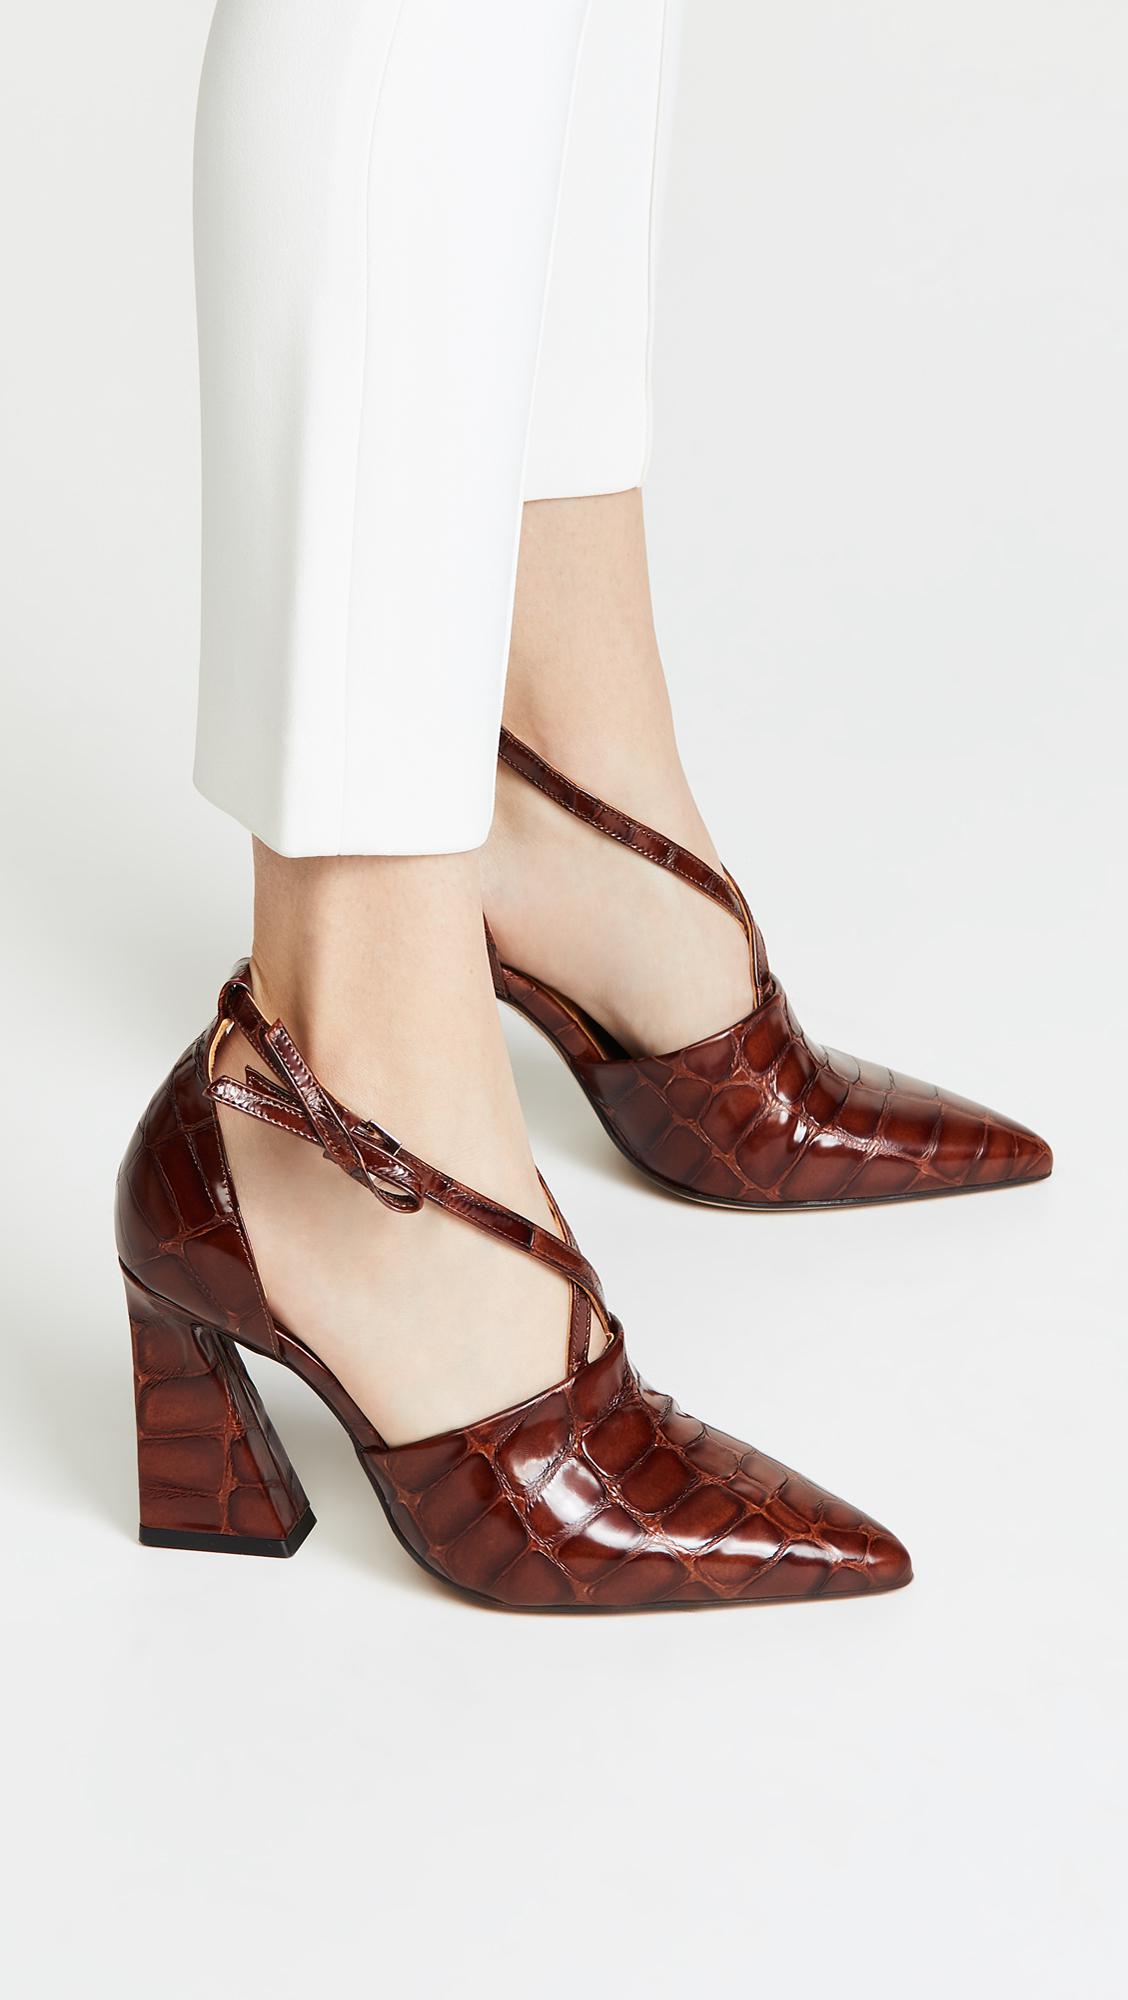 Ganni Leather Lina Pumps in Cognac (Brown) - Lyst